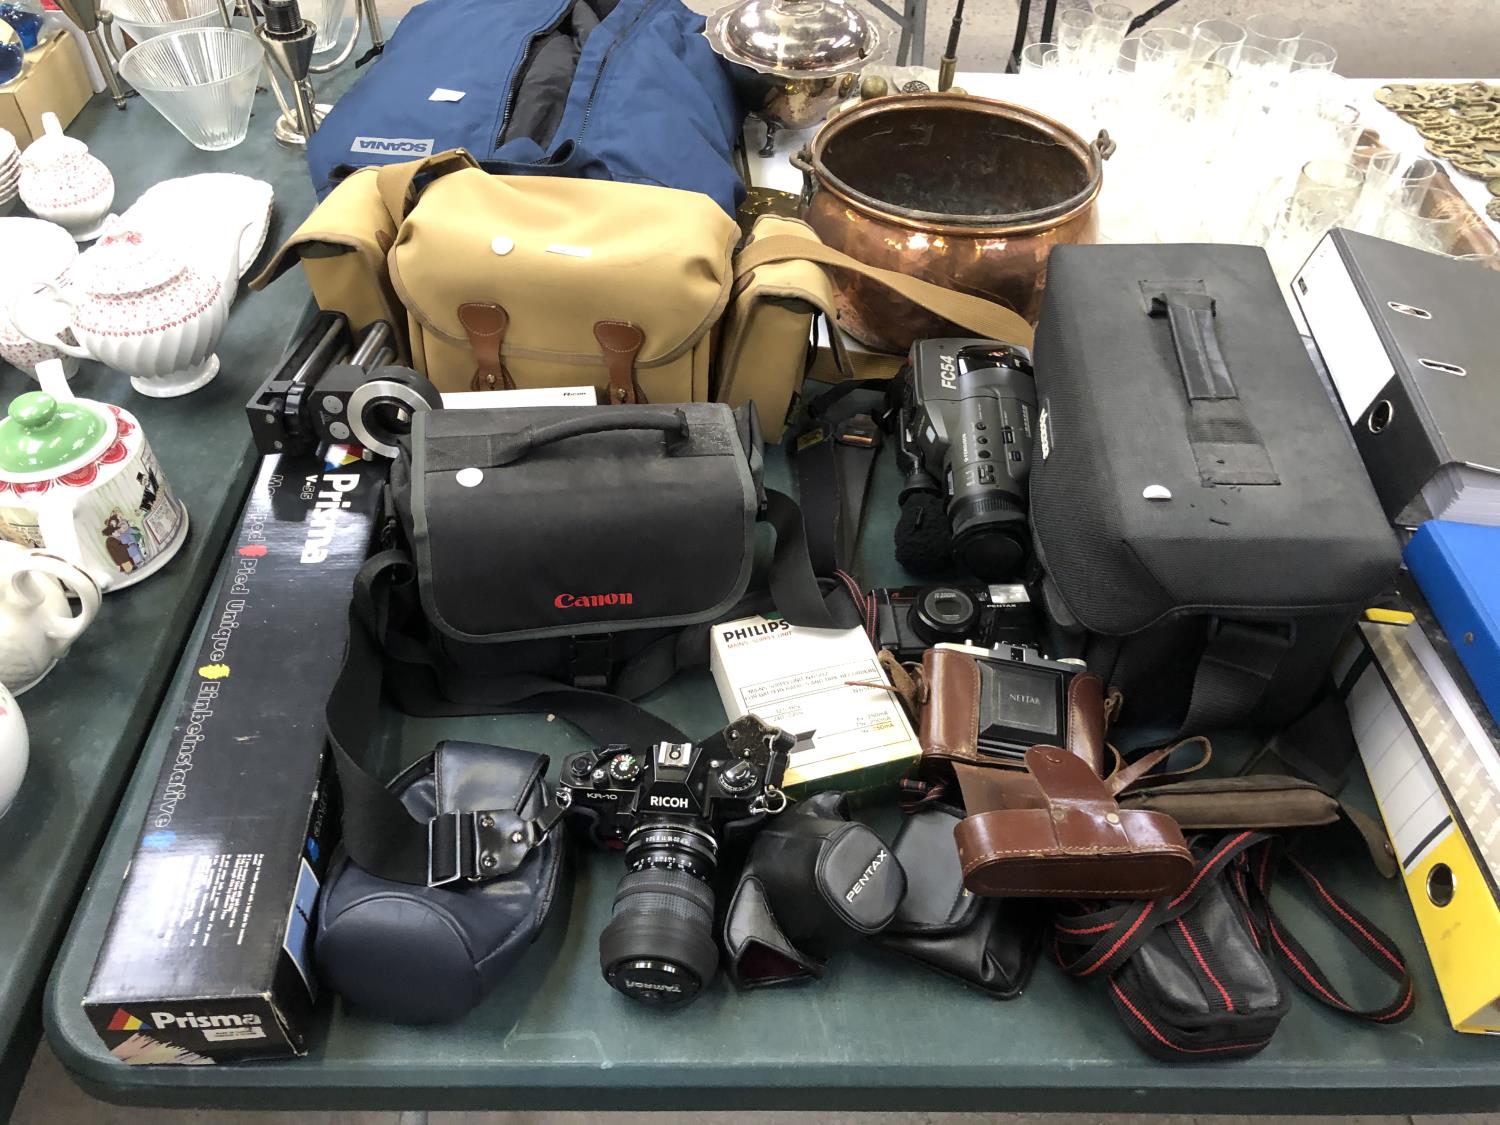 VARIOUS CAMERAS AND CASES - RICOH KR-10 ETC